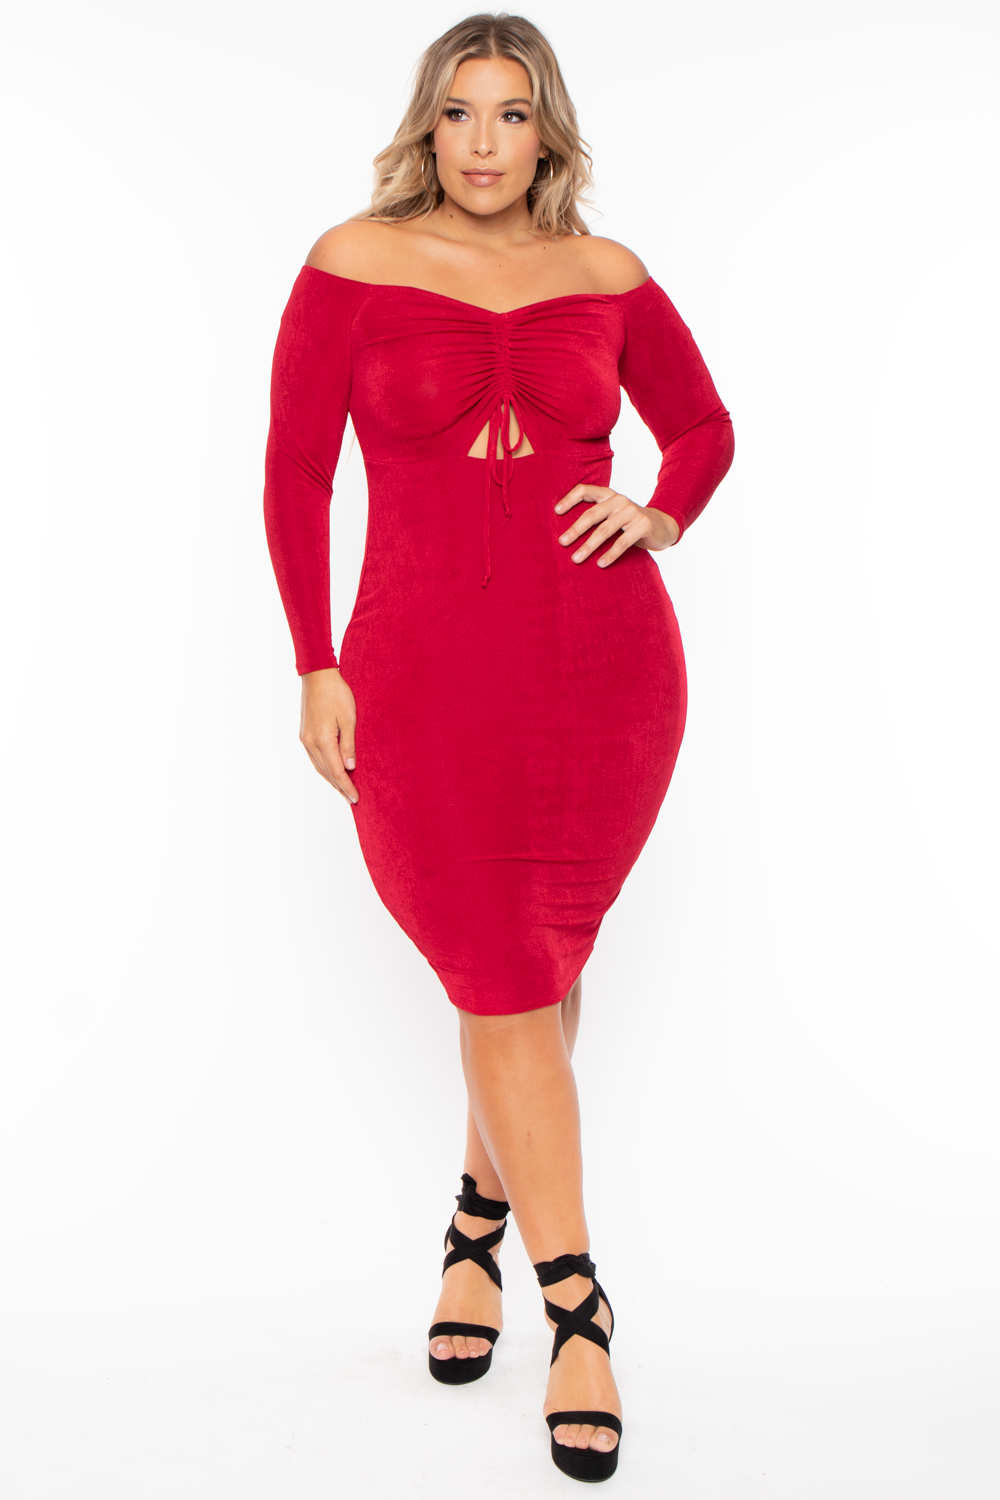 Plus Size Aveline Ruched Dress - Red - Curvy Sense